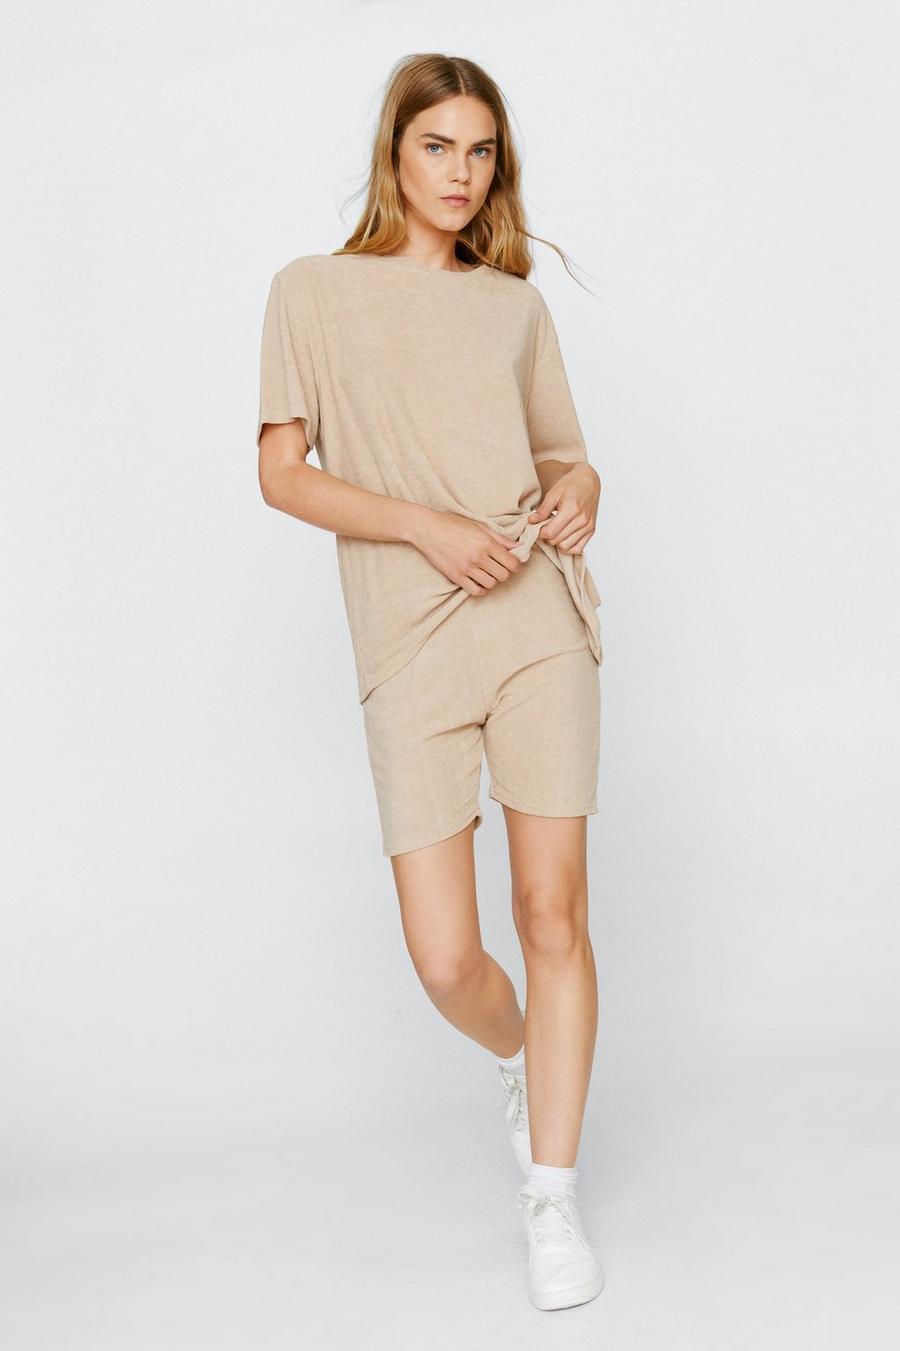 Towelling Crew Neck Top and Shorts Co-ord Set